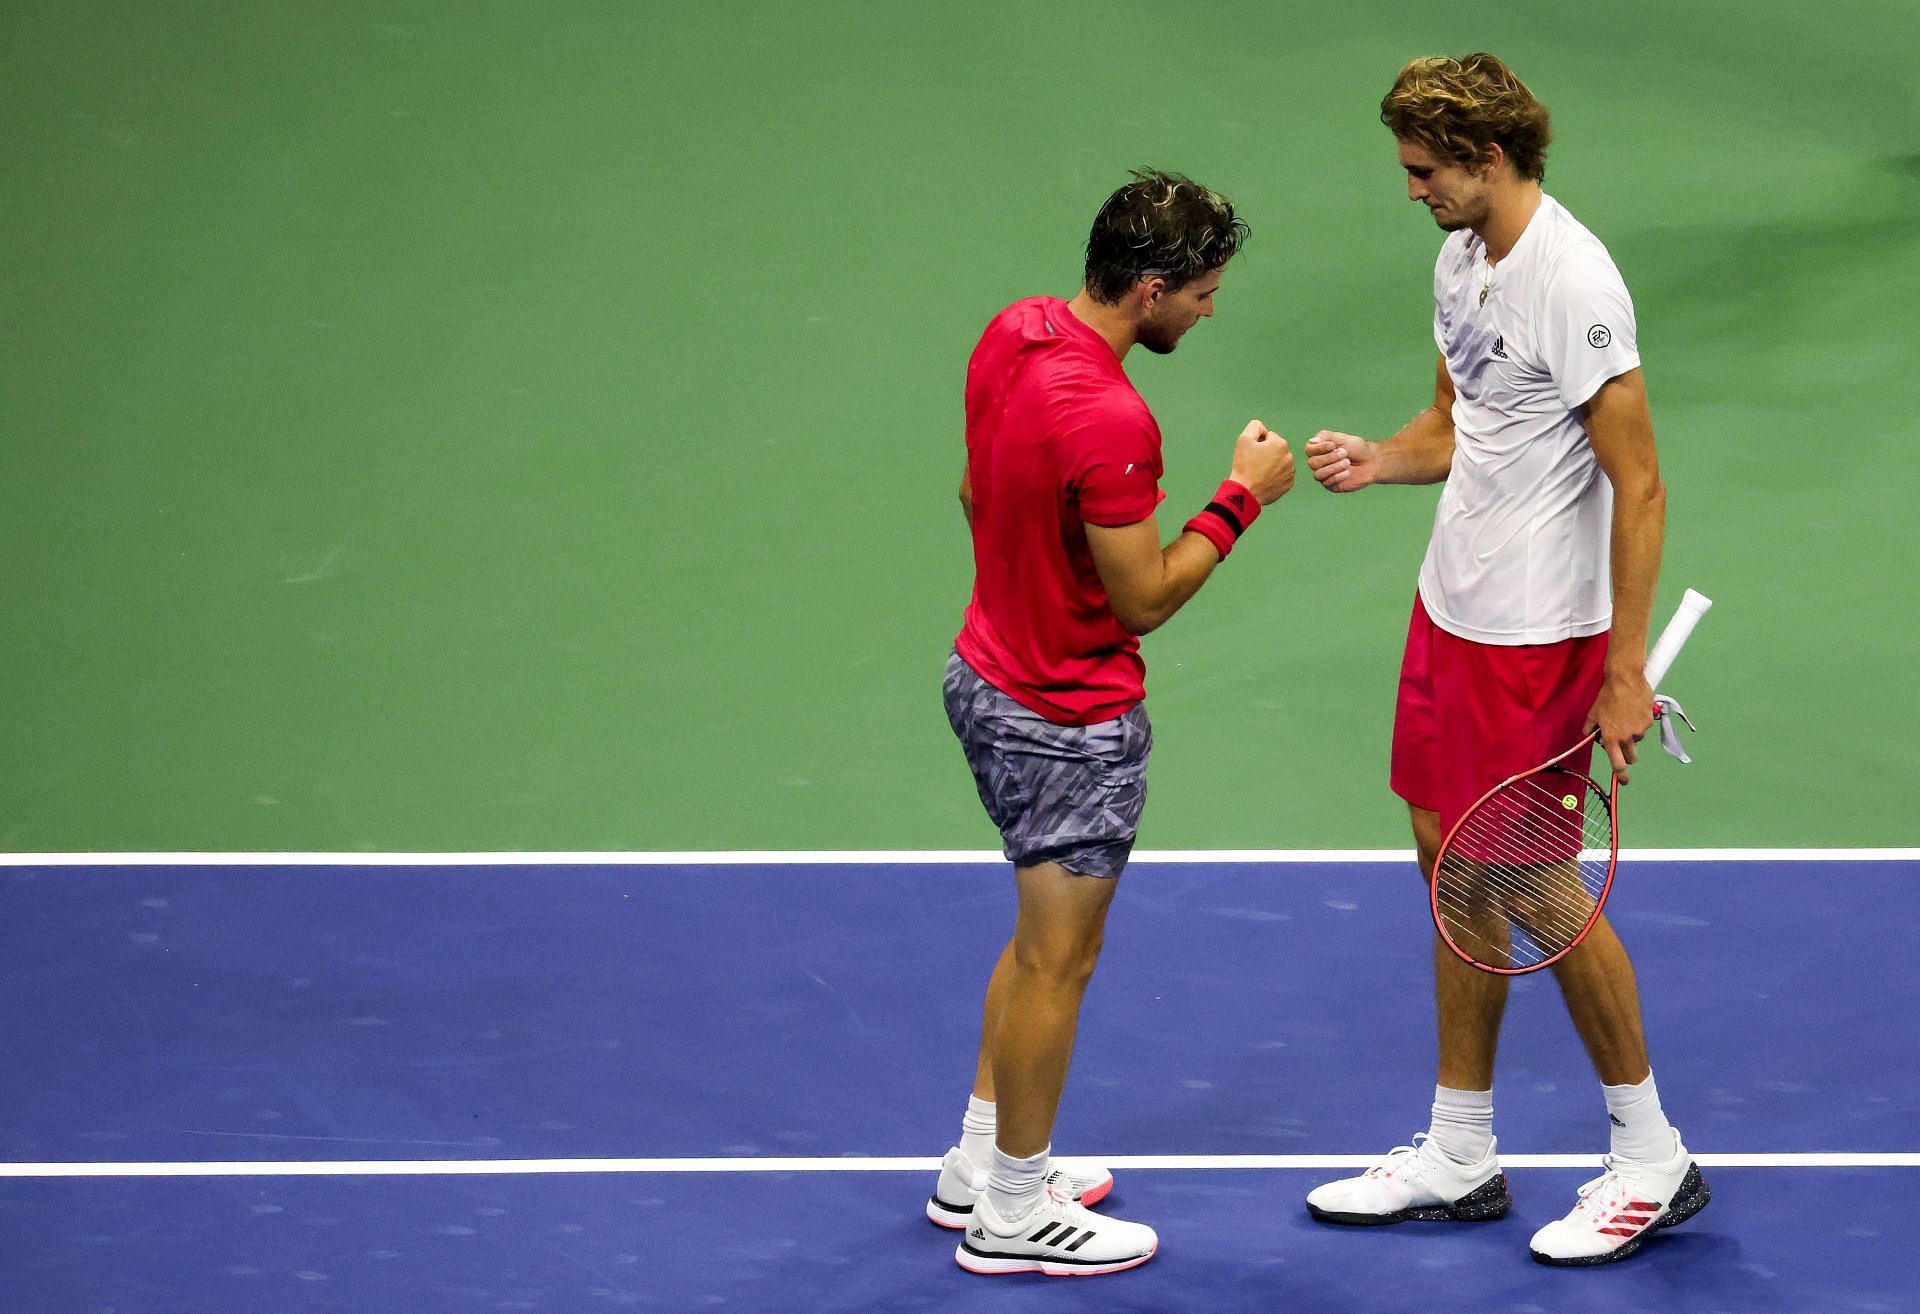 Dominic Thiem (L) and Alexander Zverev at the 2020 US Open - Day 14